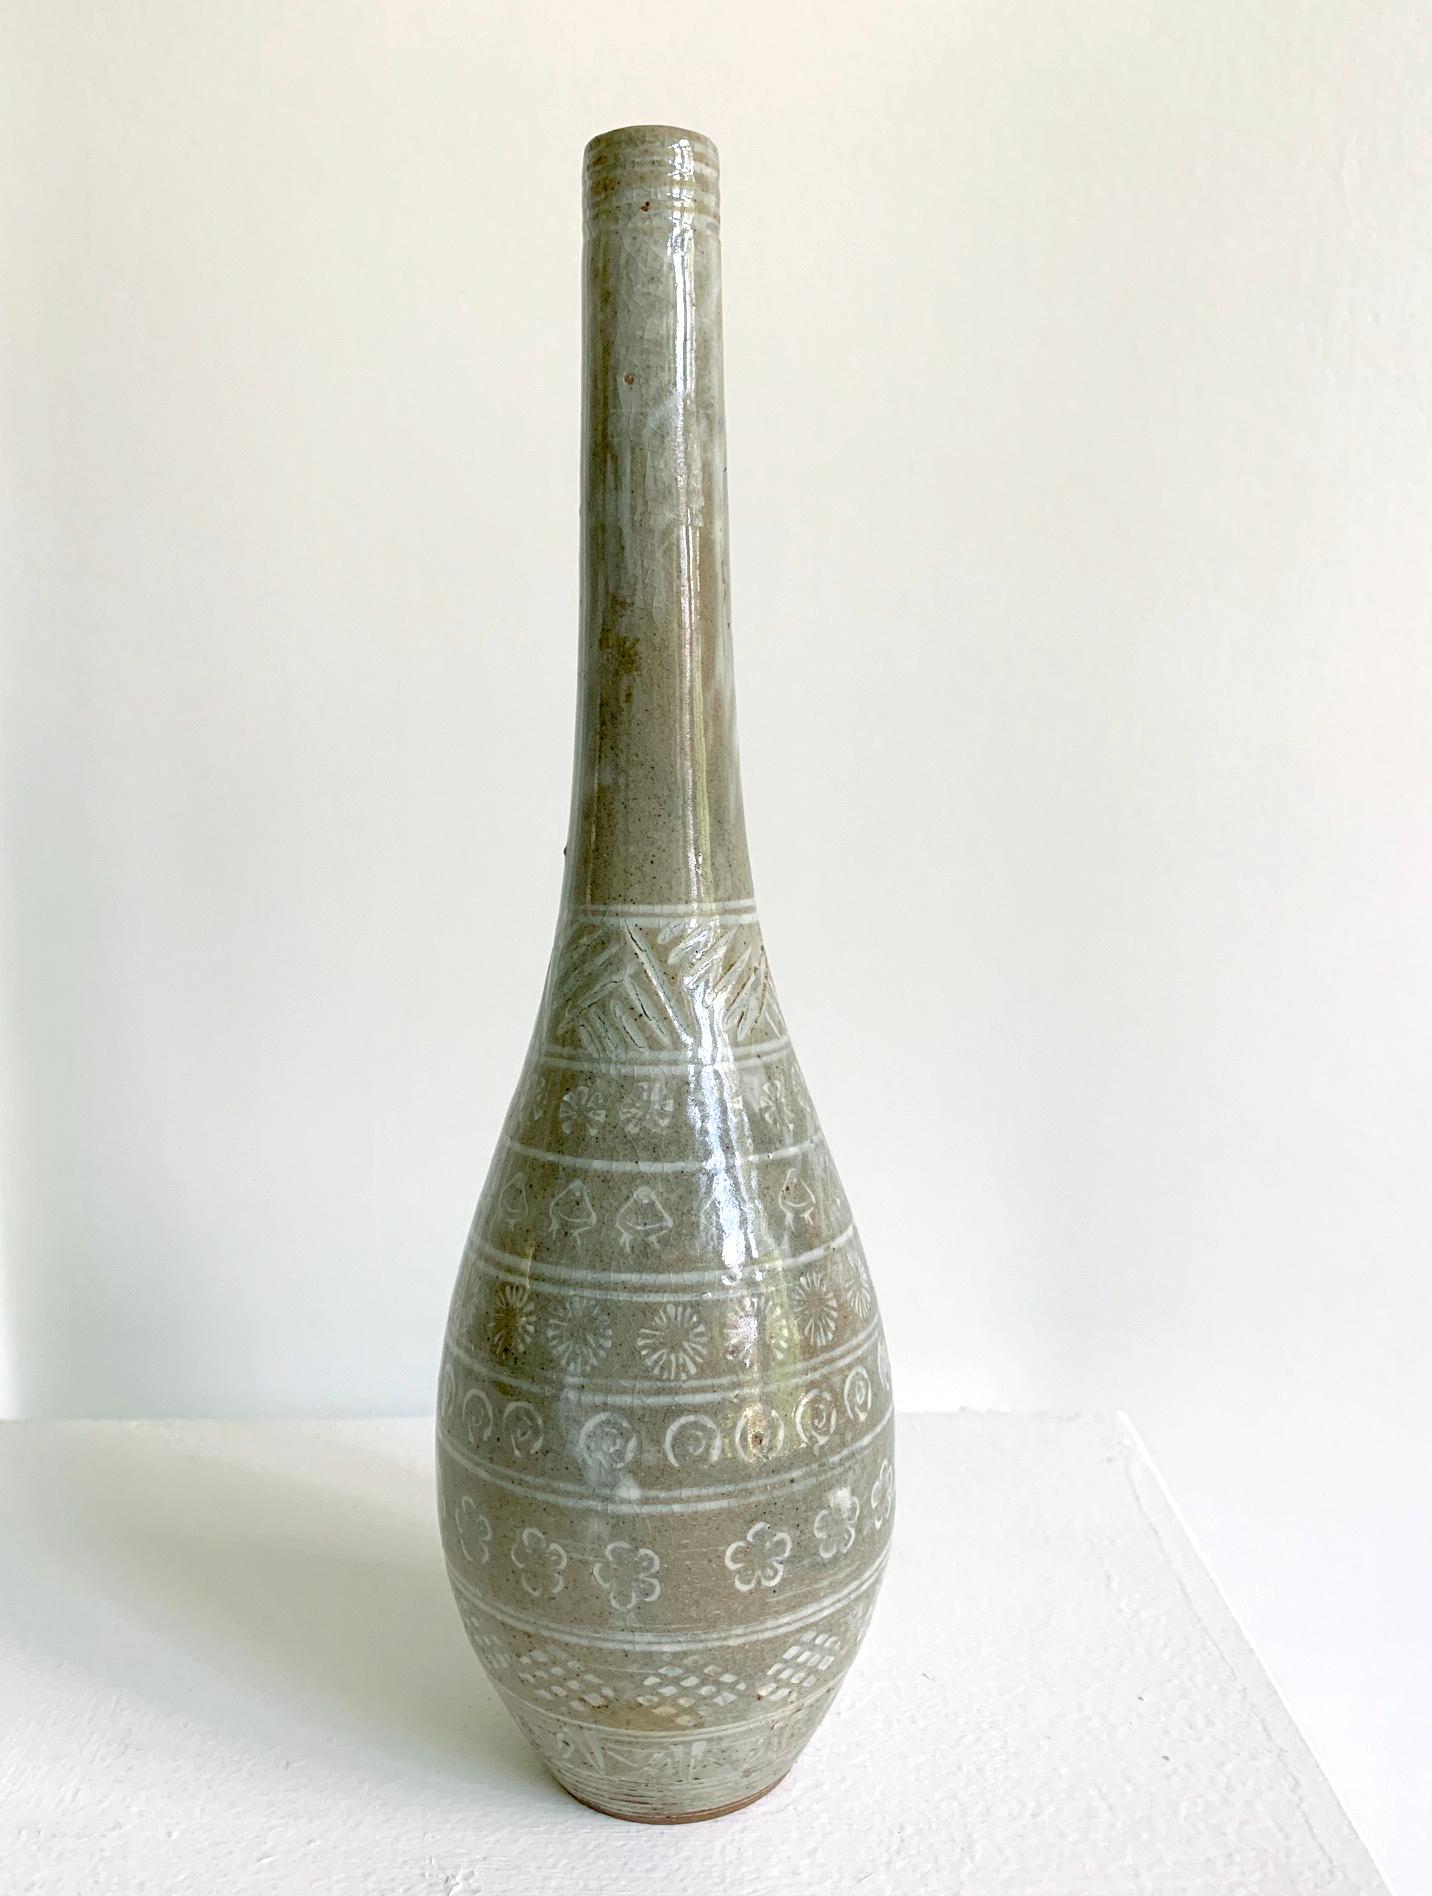 A Japanese long neck slender ceramic vase in the style of Mishima, circa 19th century, Meiji period. Mishima pottery was originally imported from three islands in Taiwan and then from Korea in the Edo period circa 15th-16th century for tea ware.